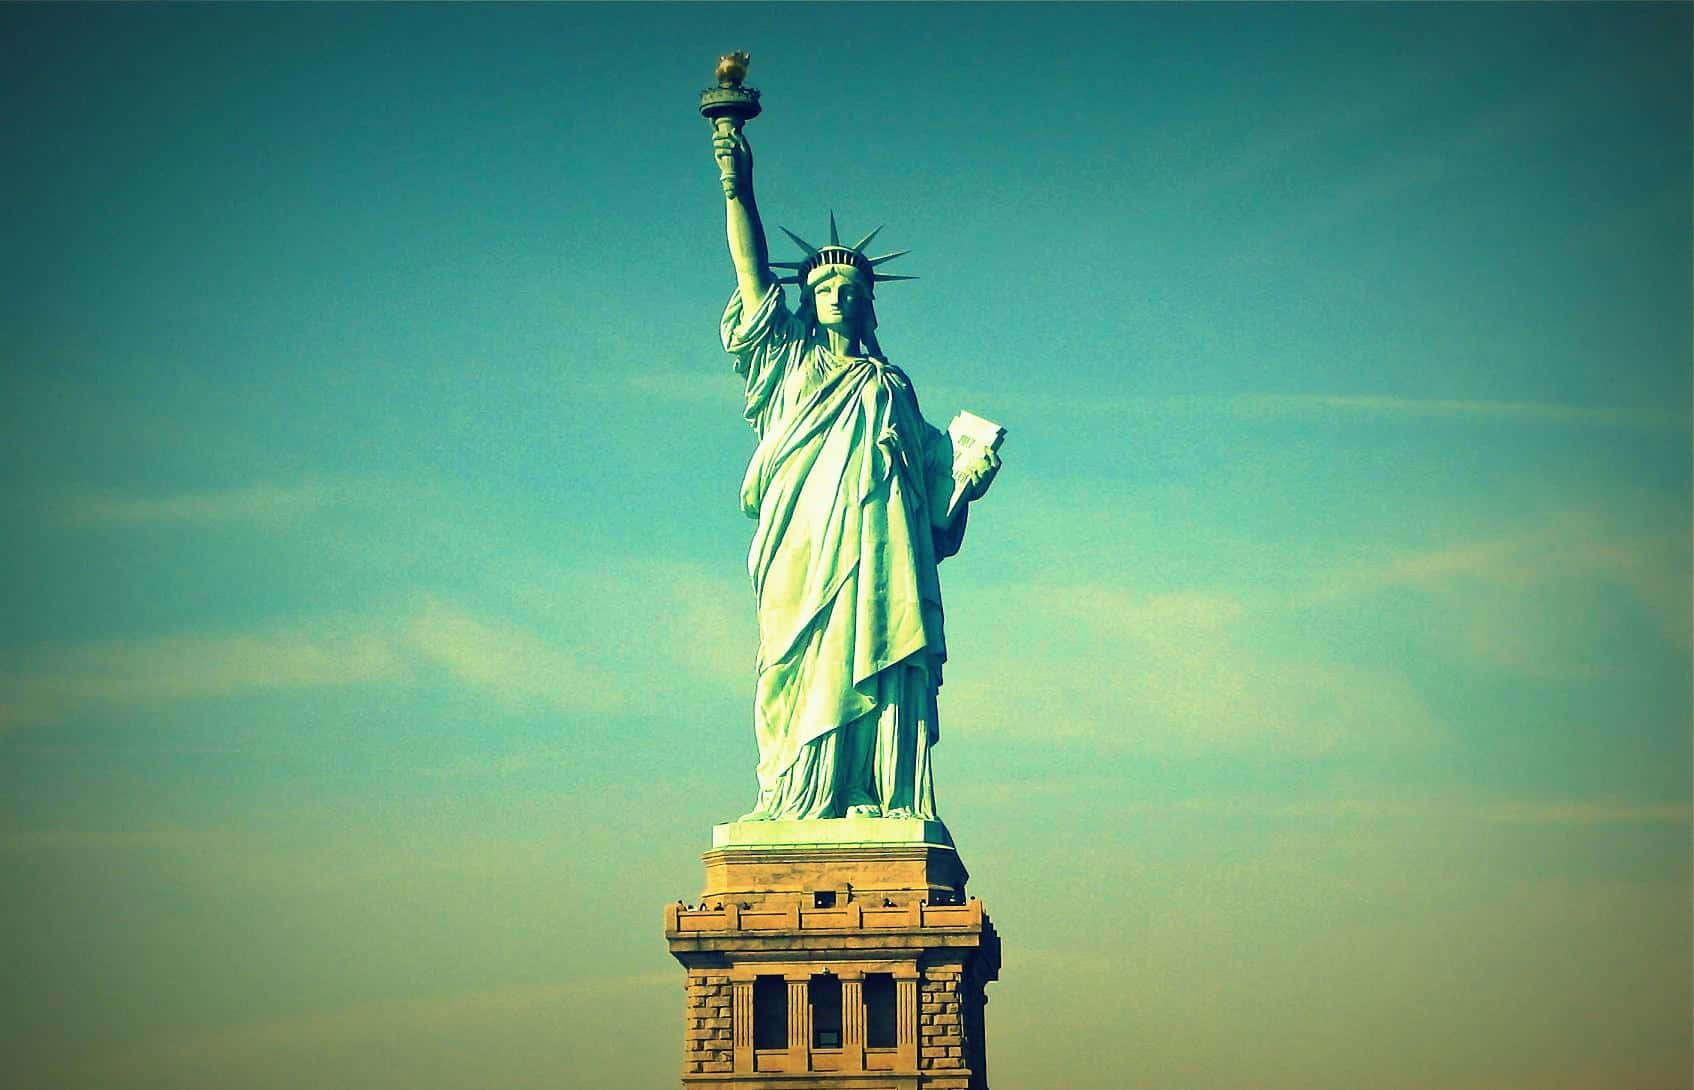 Lady Liberty stands tall in the harbor of New York City